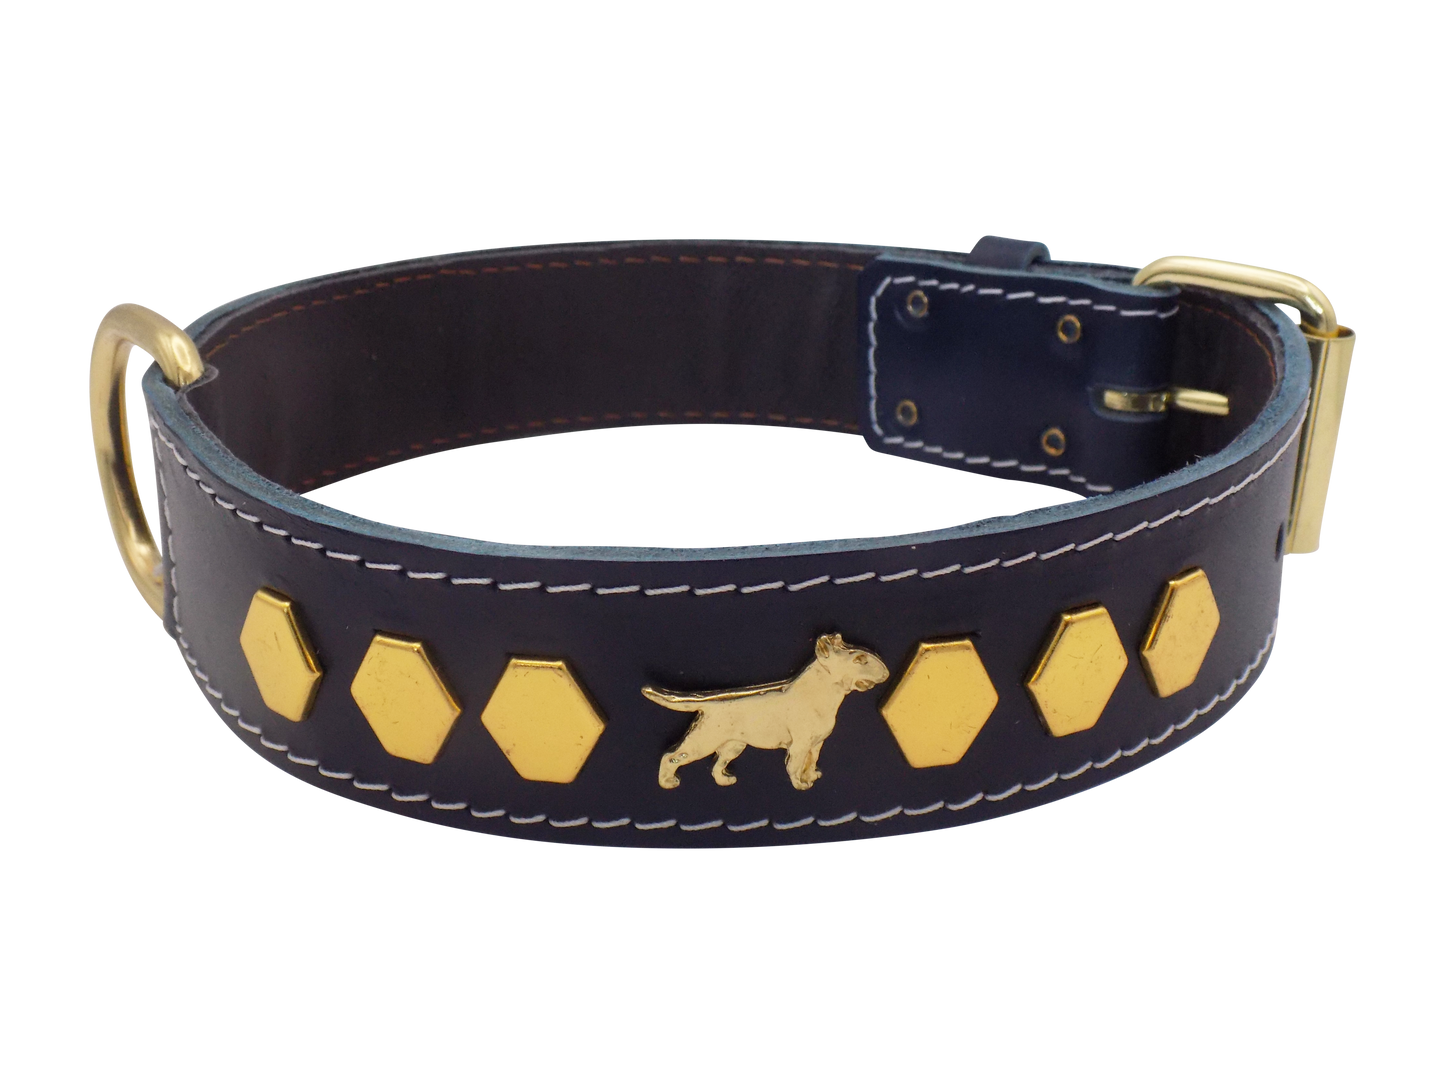 1.5" wide Leather Dog Collar with Decorative Gold Design and English Bull Terrier Badges